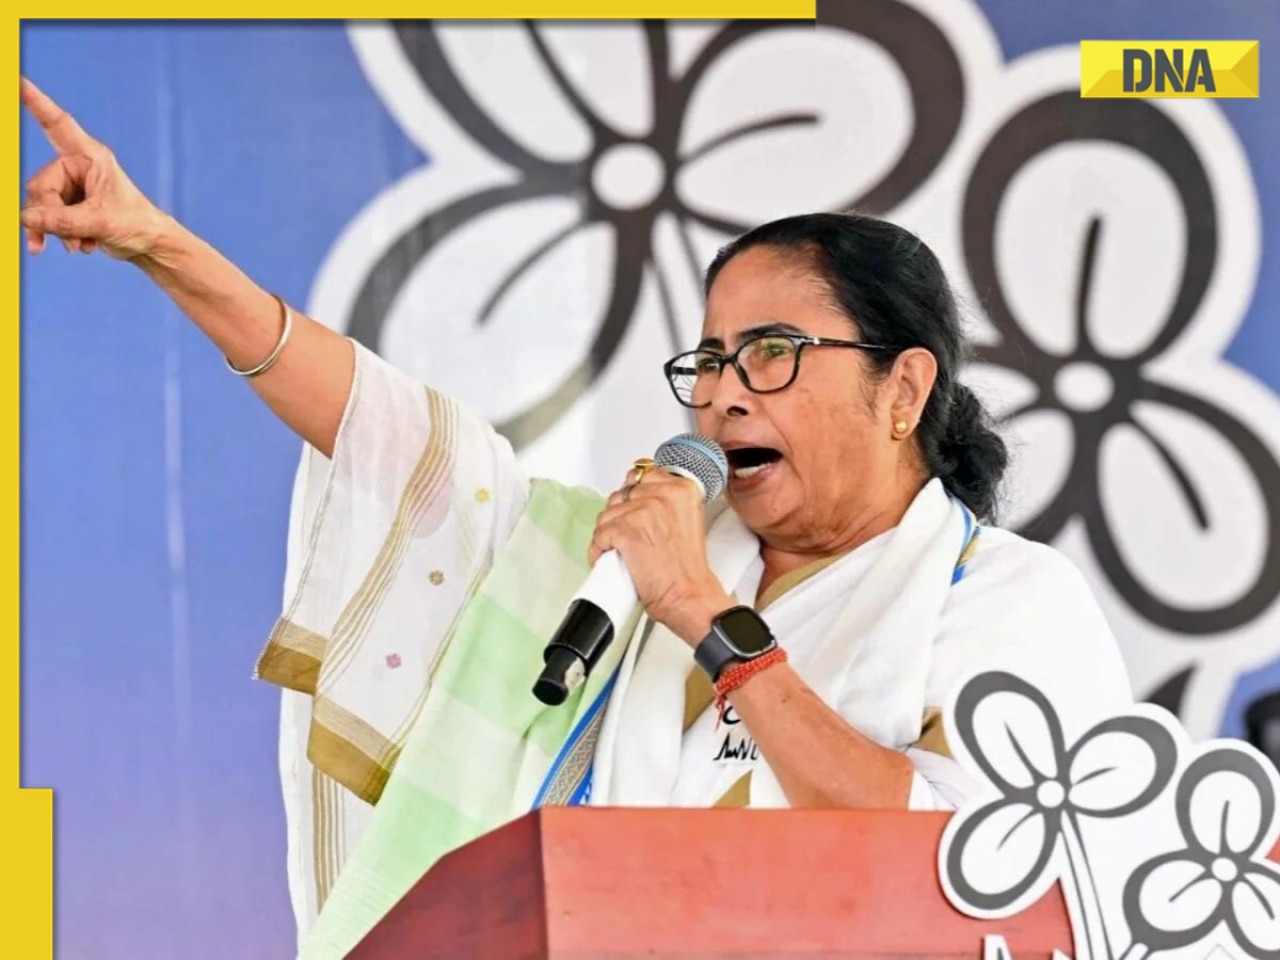 How Mamata Banerjee stopped BJP juggernaut in West Bengal, defied exit polls to consolidate TMC's bastion